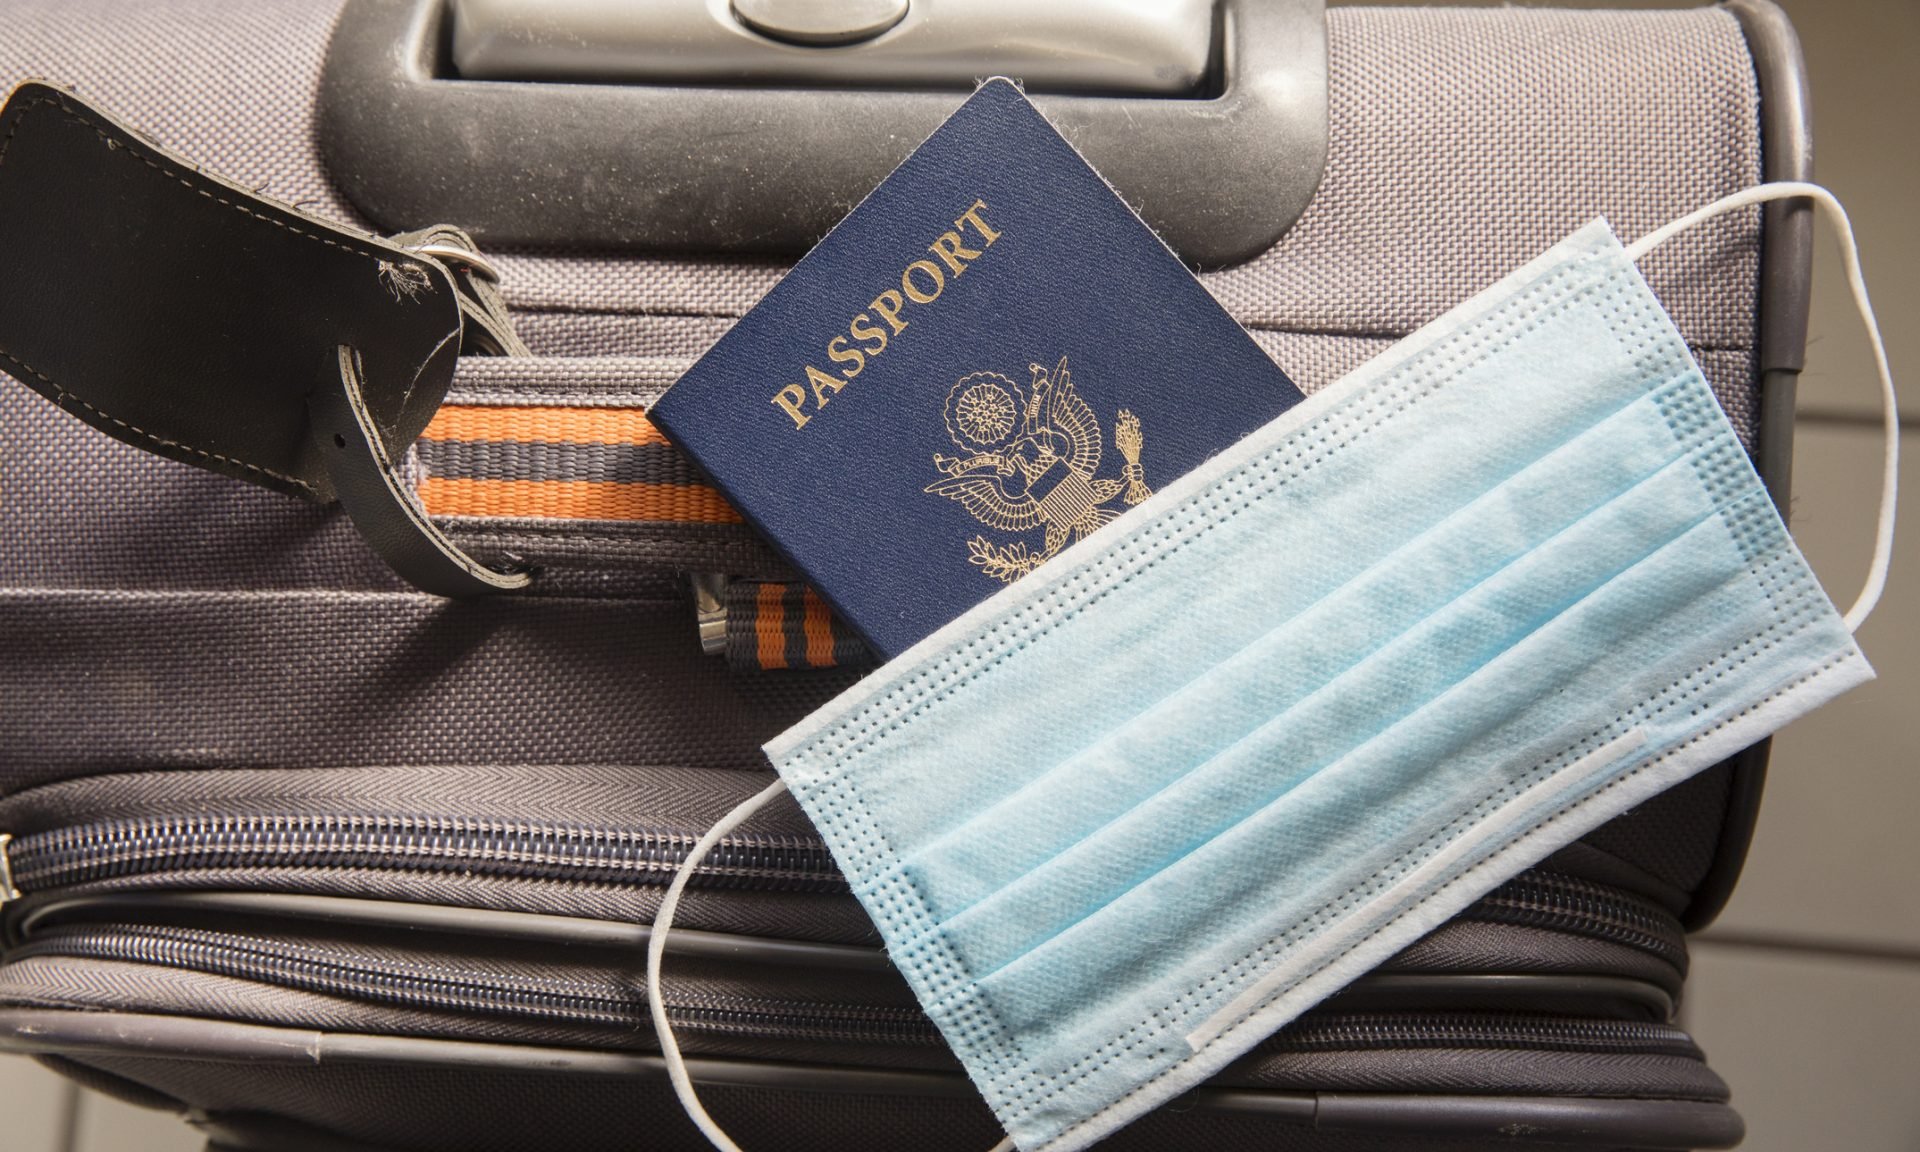 How a Passport Can Help you Fly Domestically